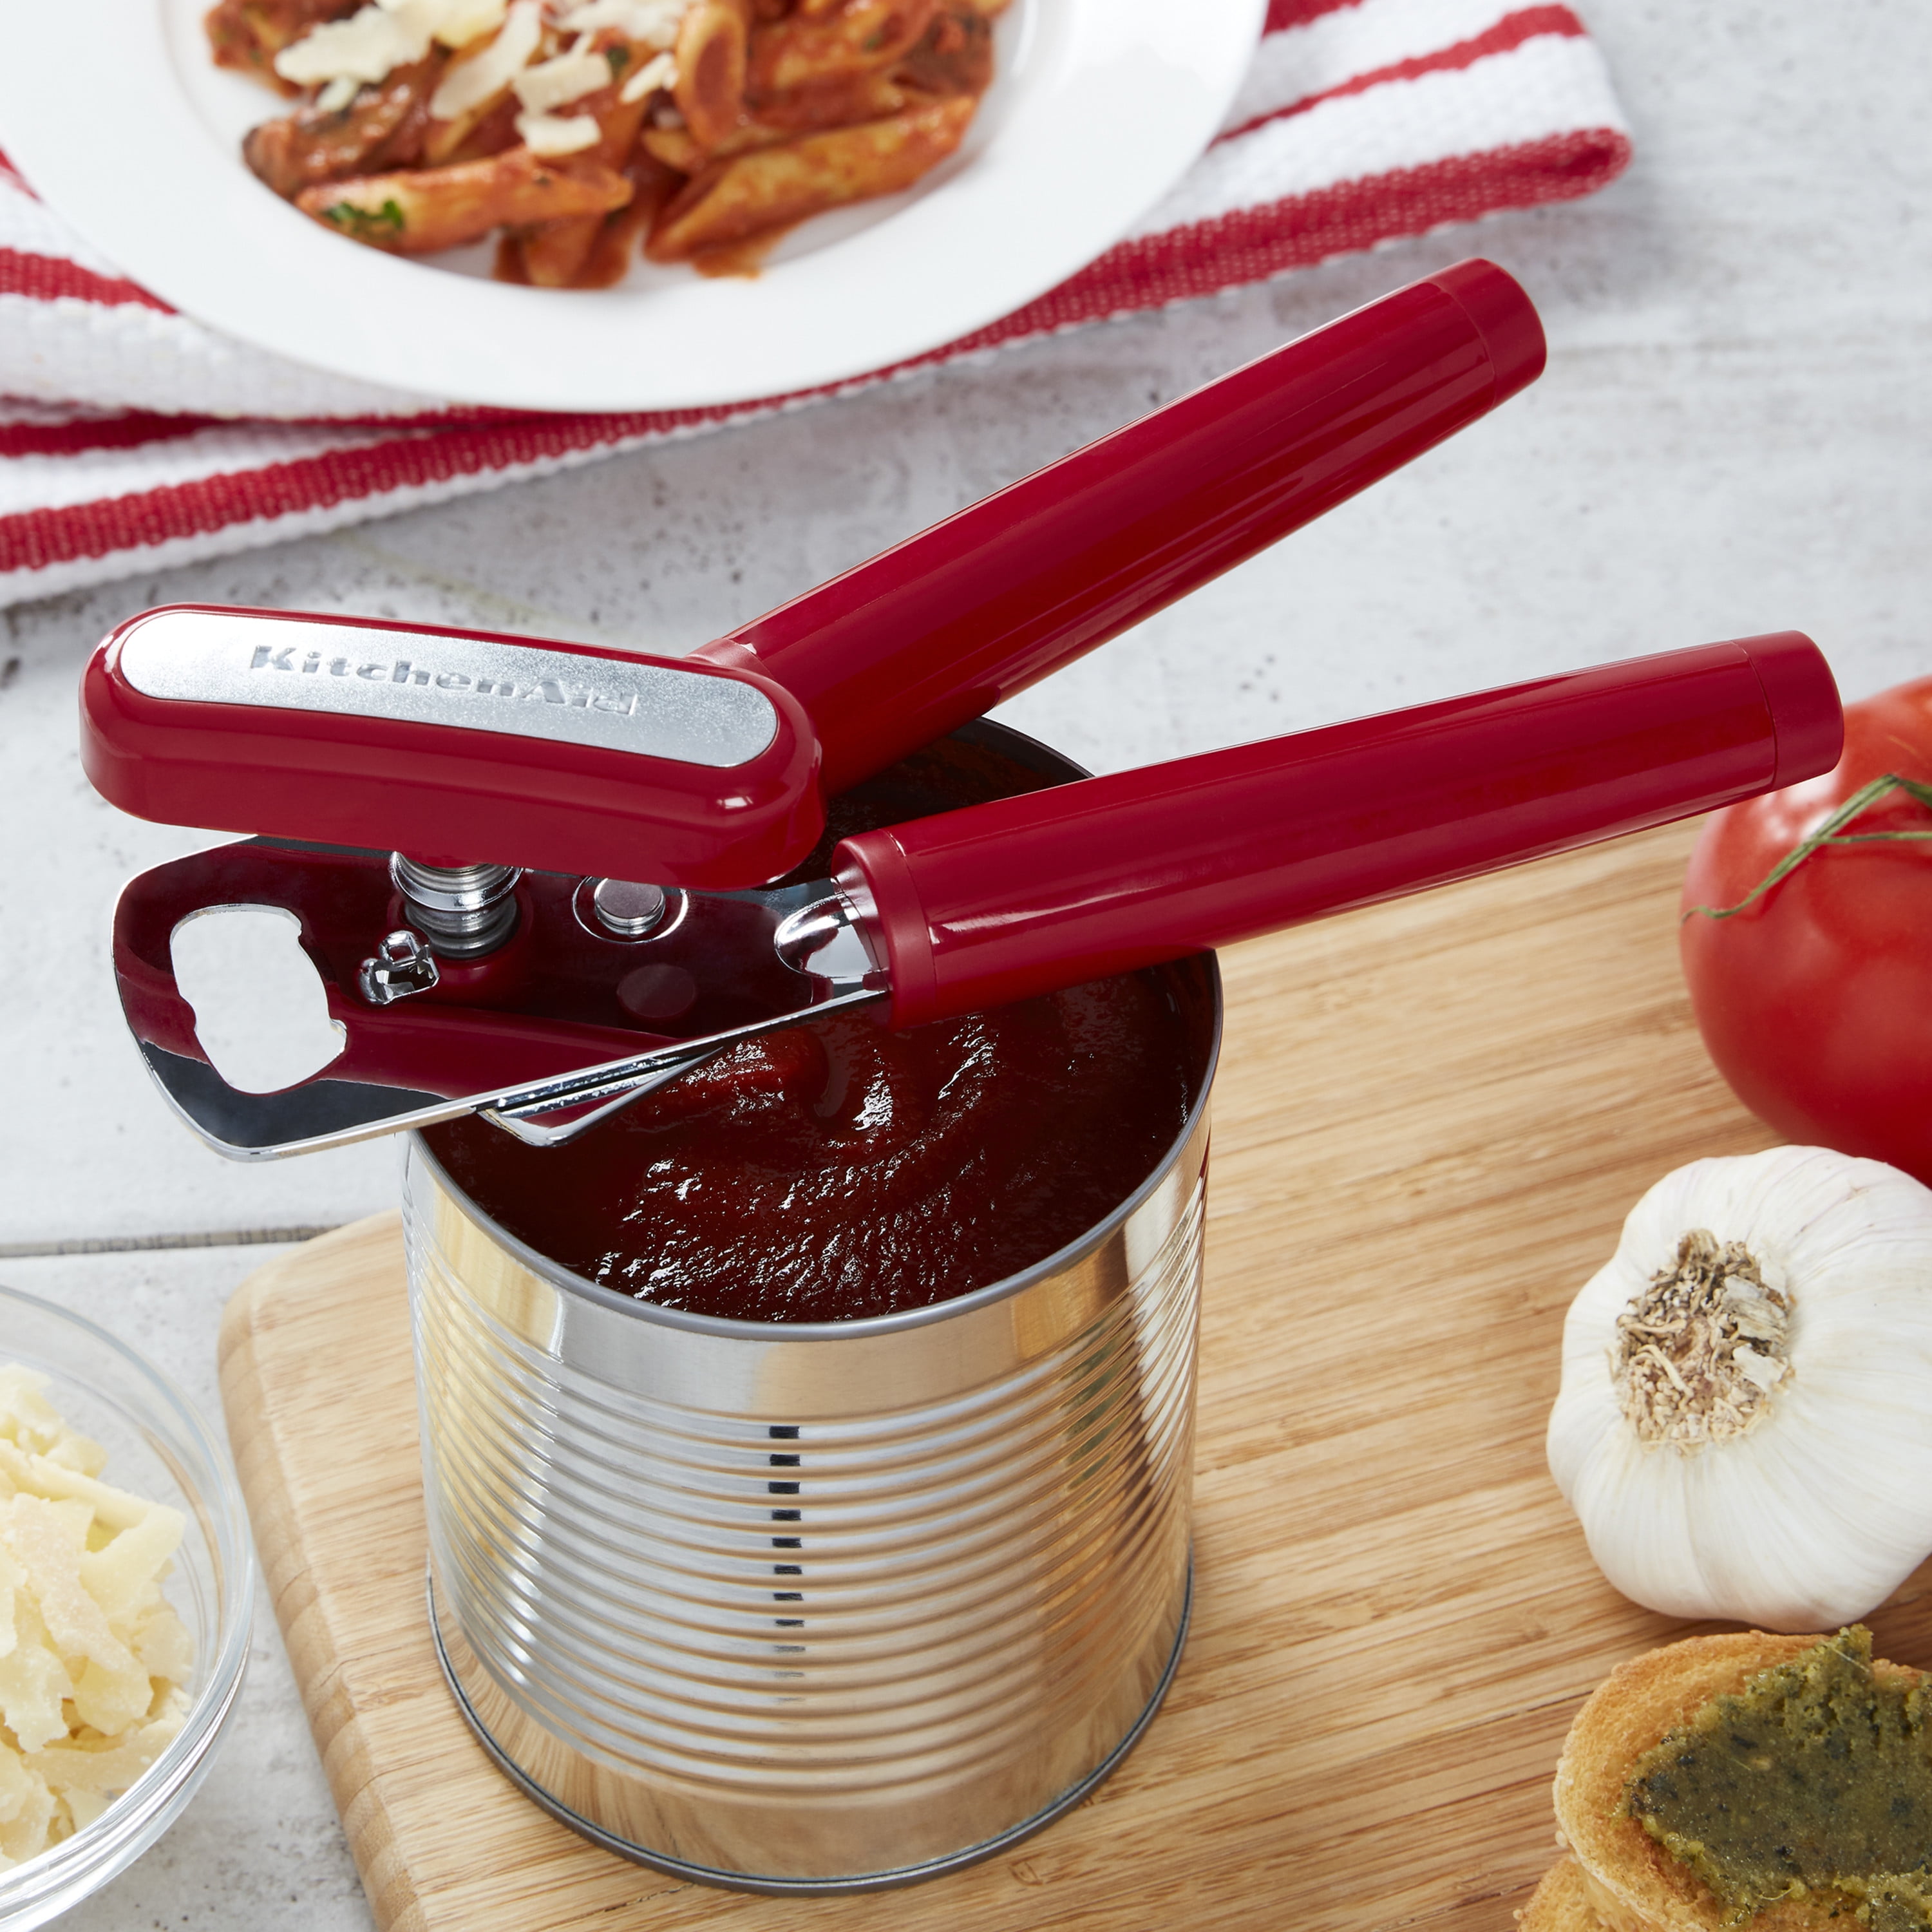 Grab the top-rated KitchenAid can opener that shoppers say works